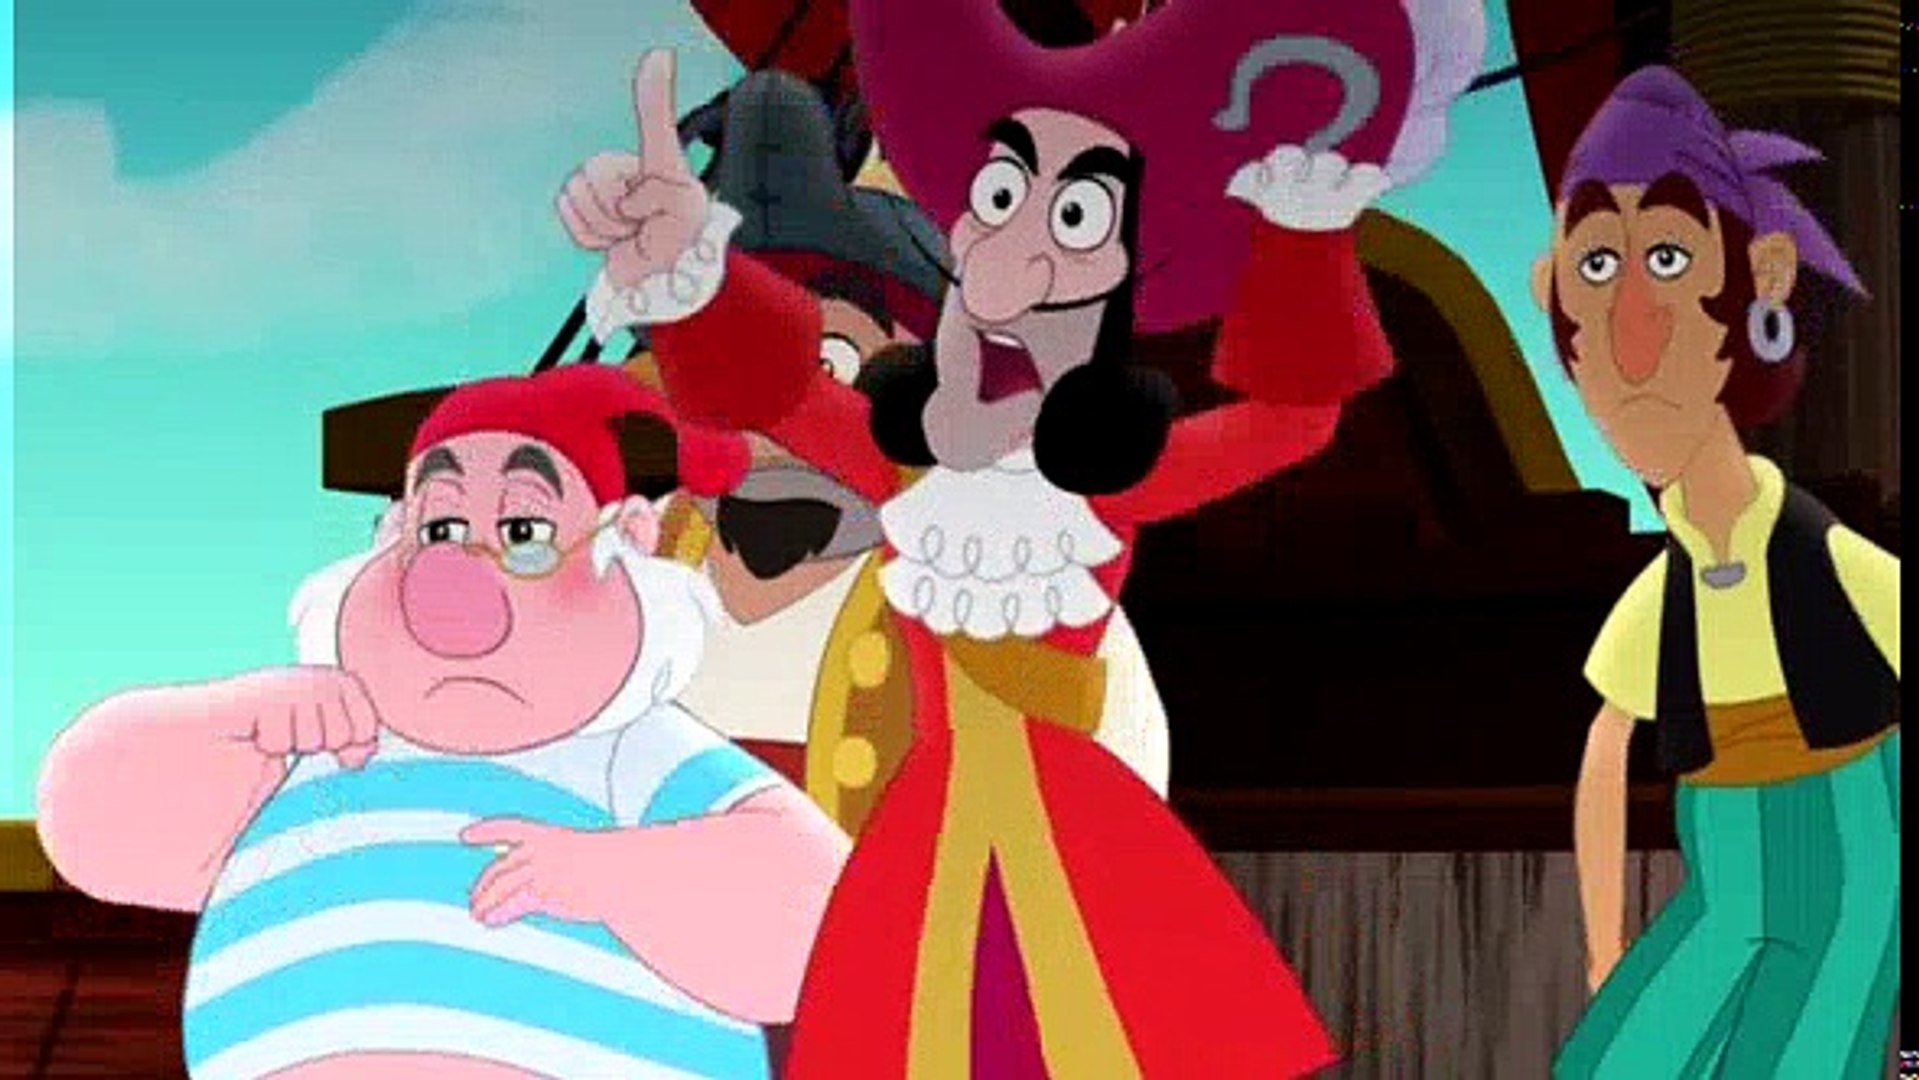 darrin rodgers recommends hook full movie dailymotion pic